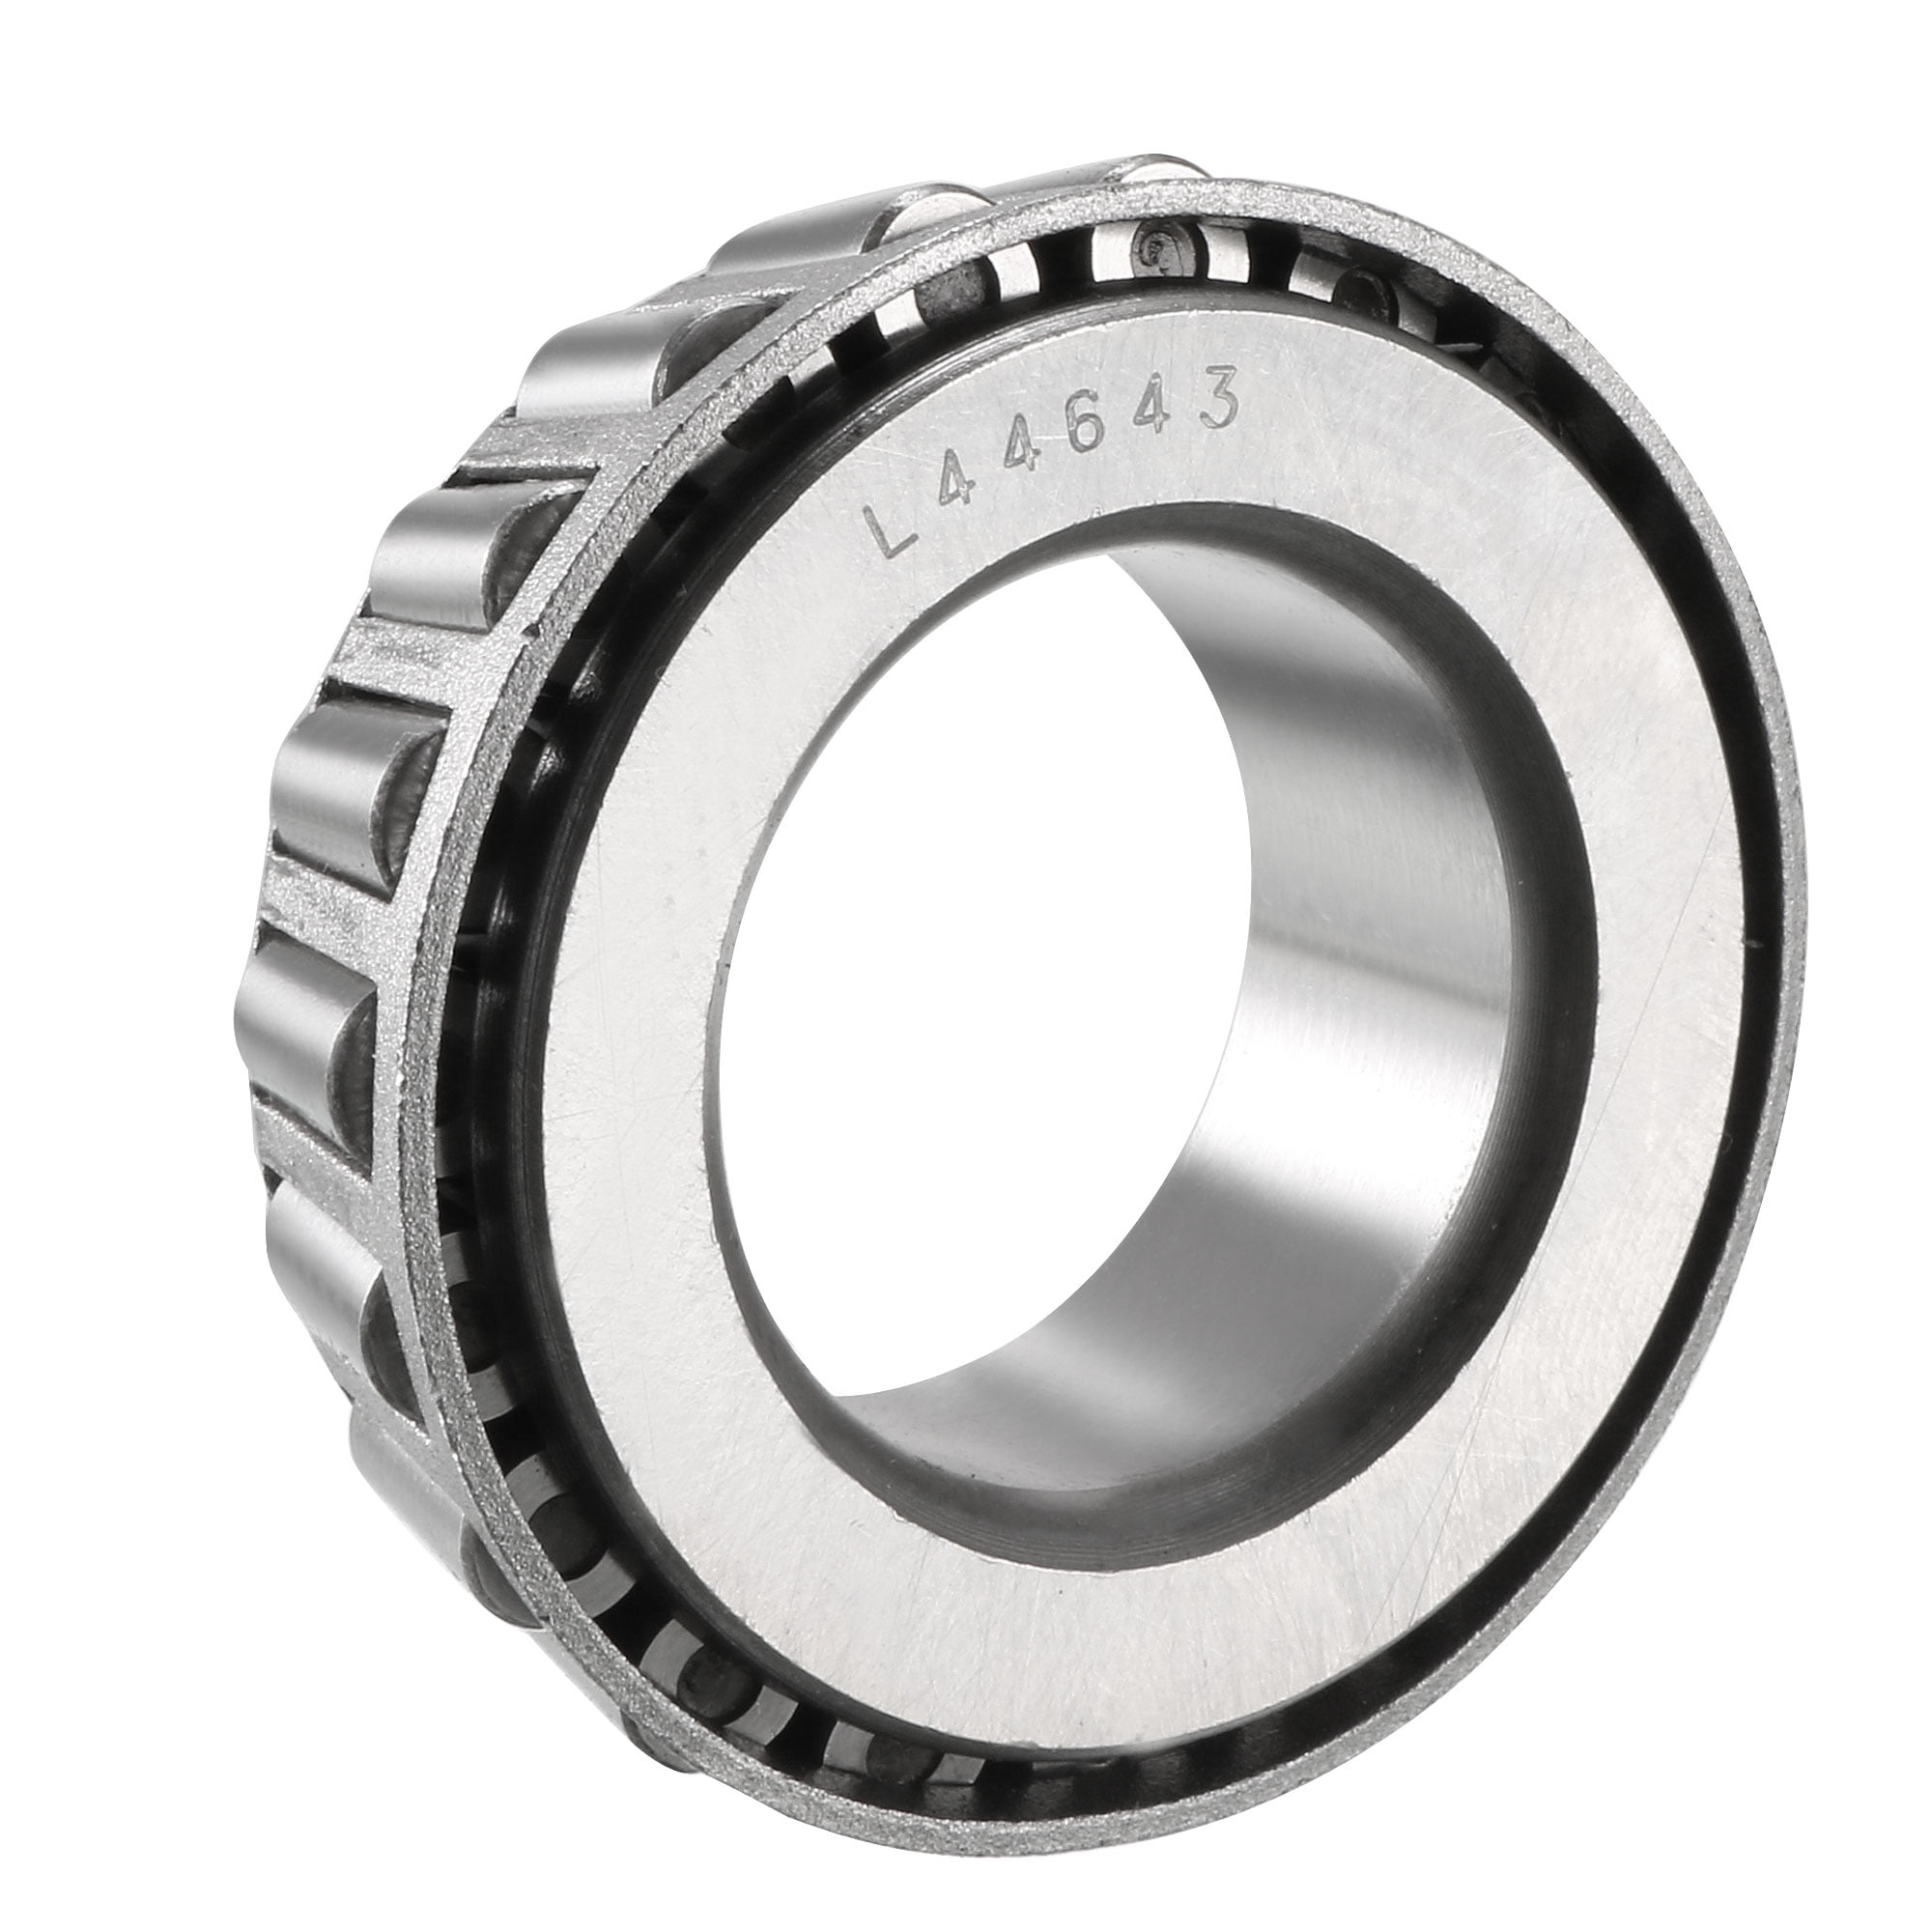 15578 Tapered Roller Bearing Single Cone 1" Bore 0.6875" Width 2pcs 